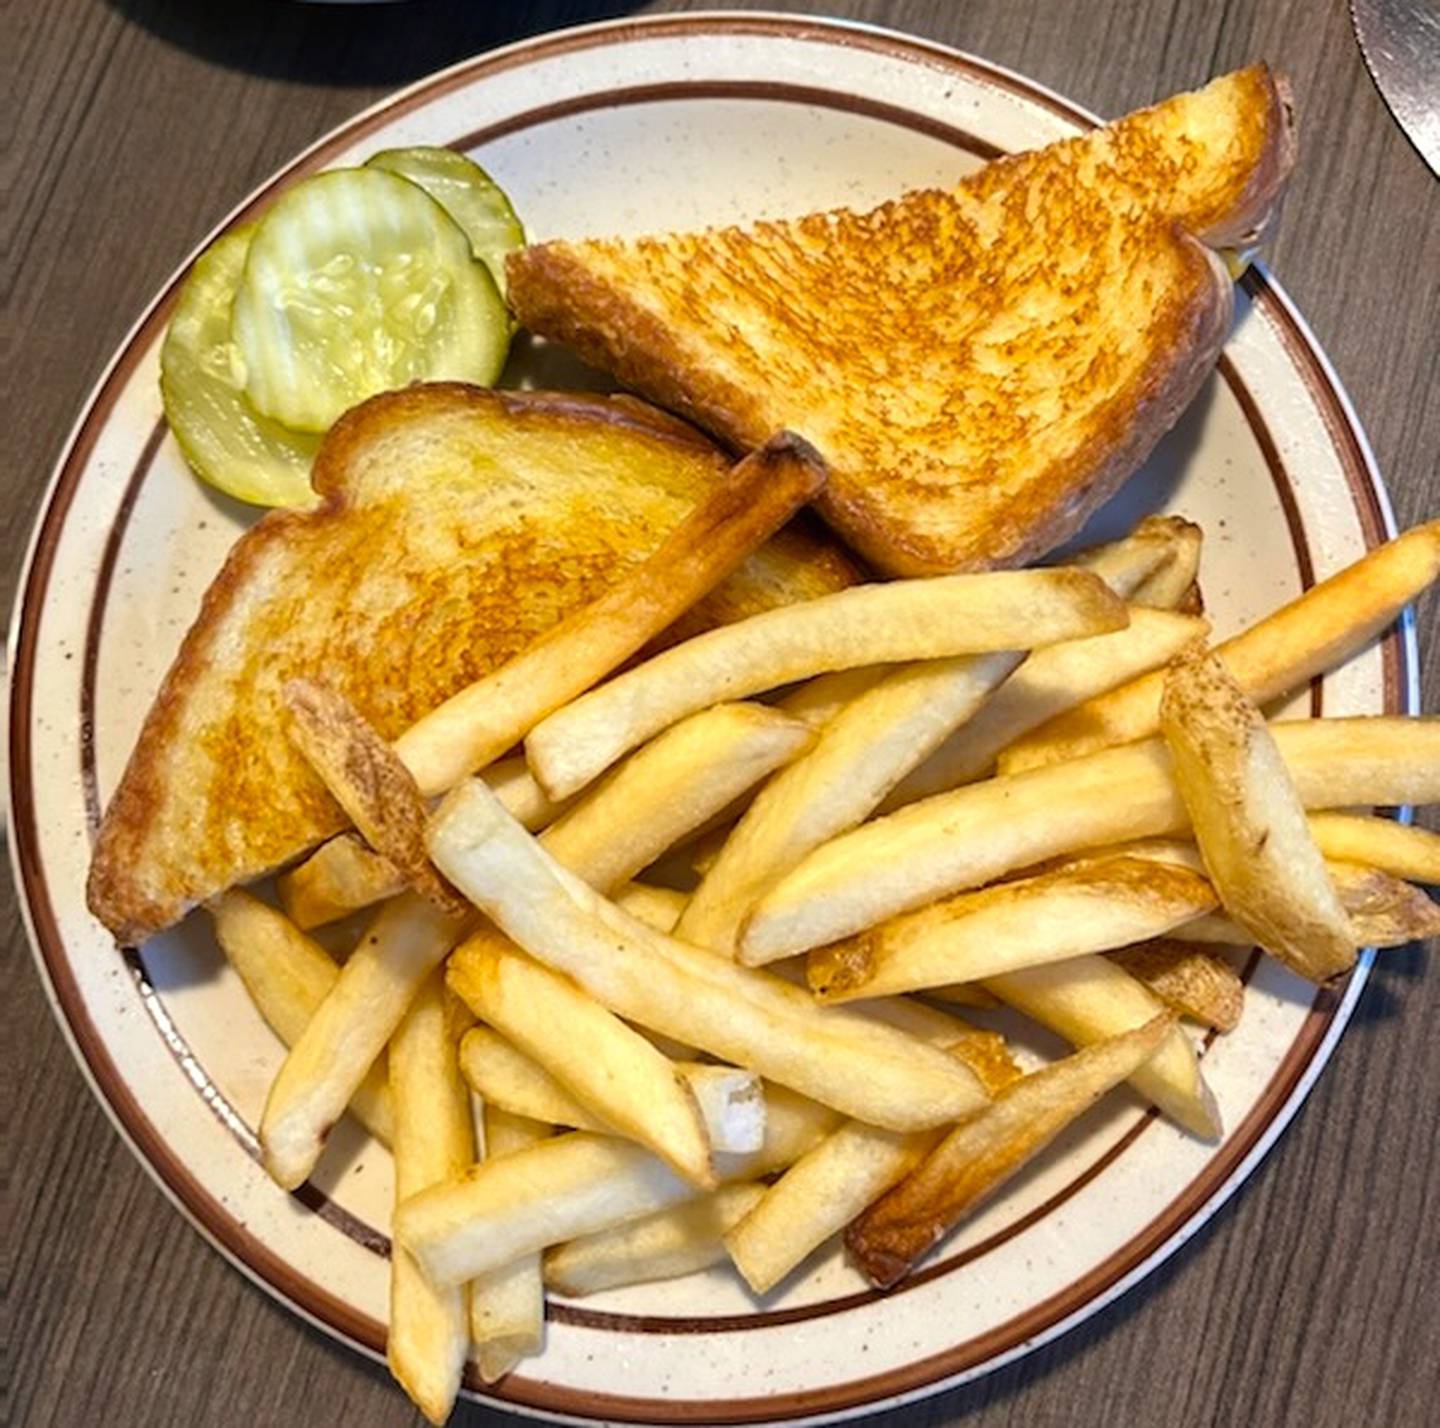 The grilled cheese and fries is on the children's menu at the Coffee Cup.